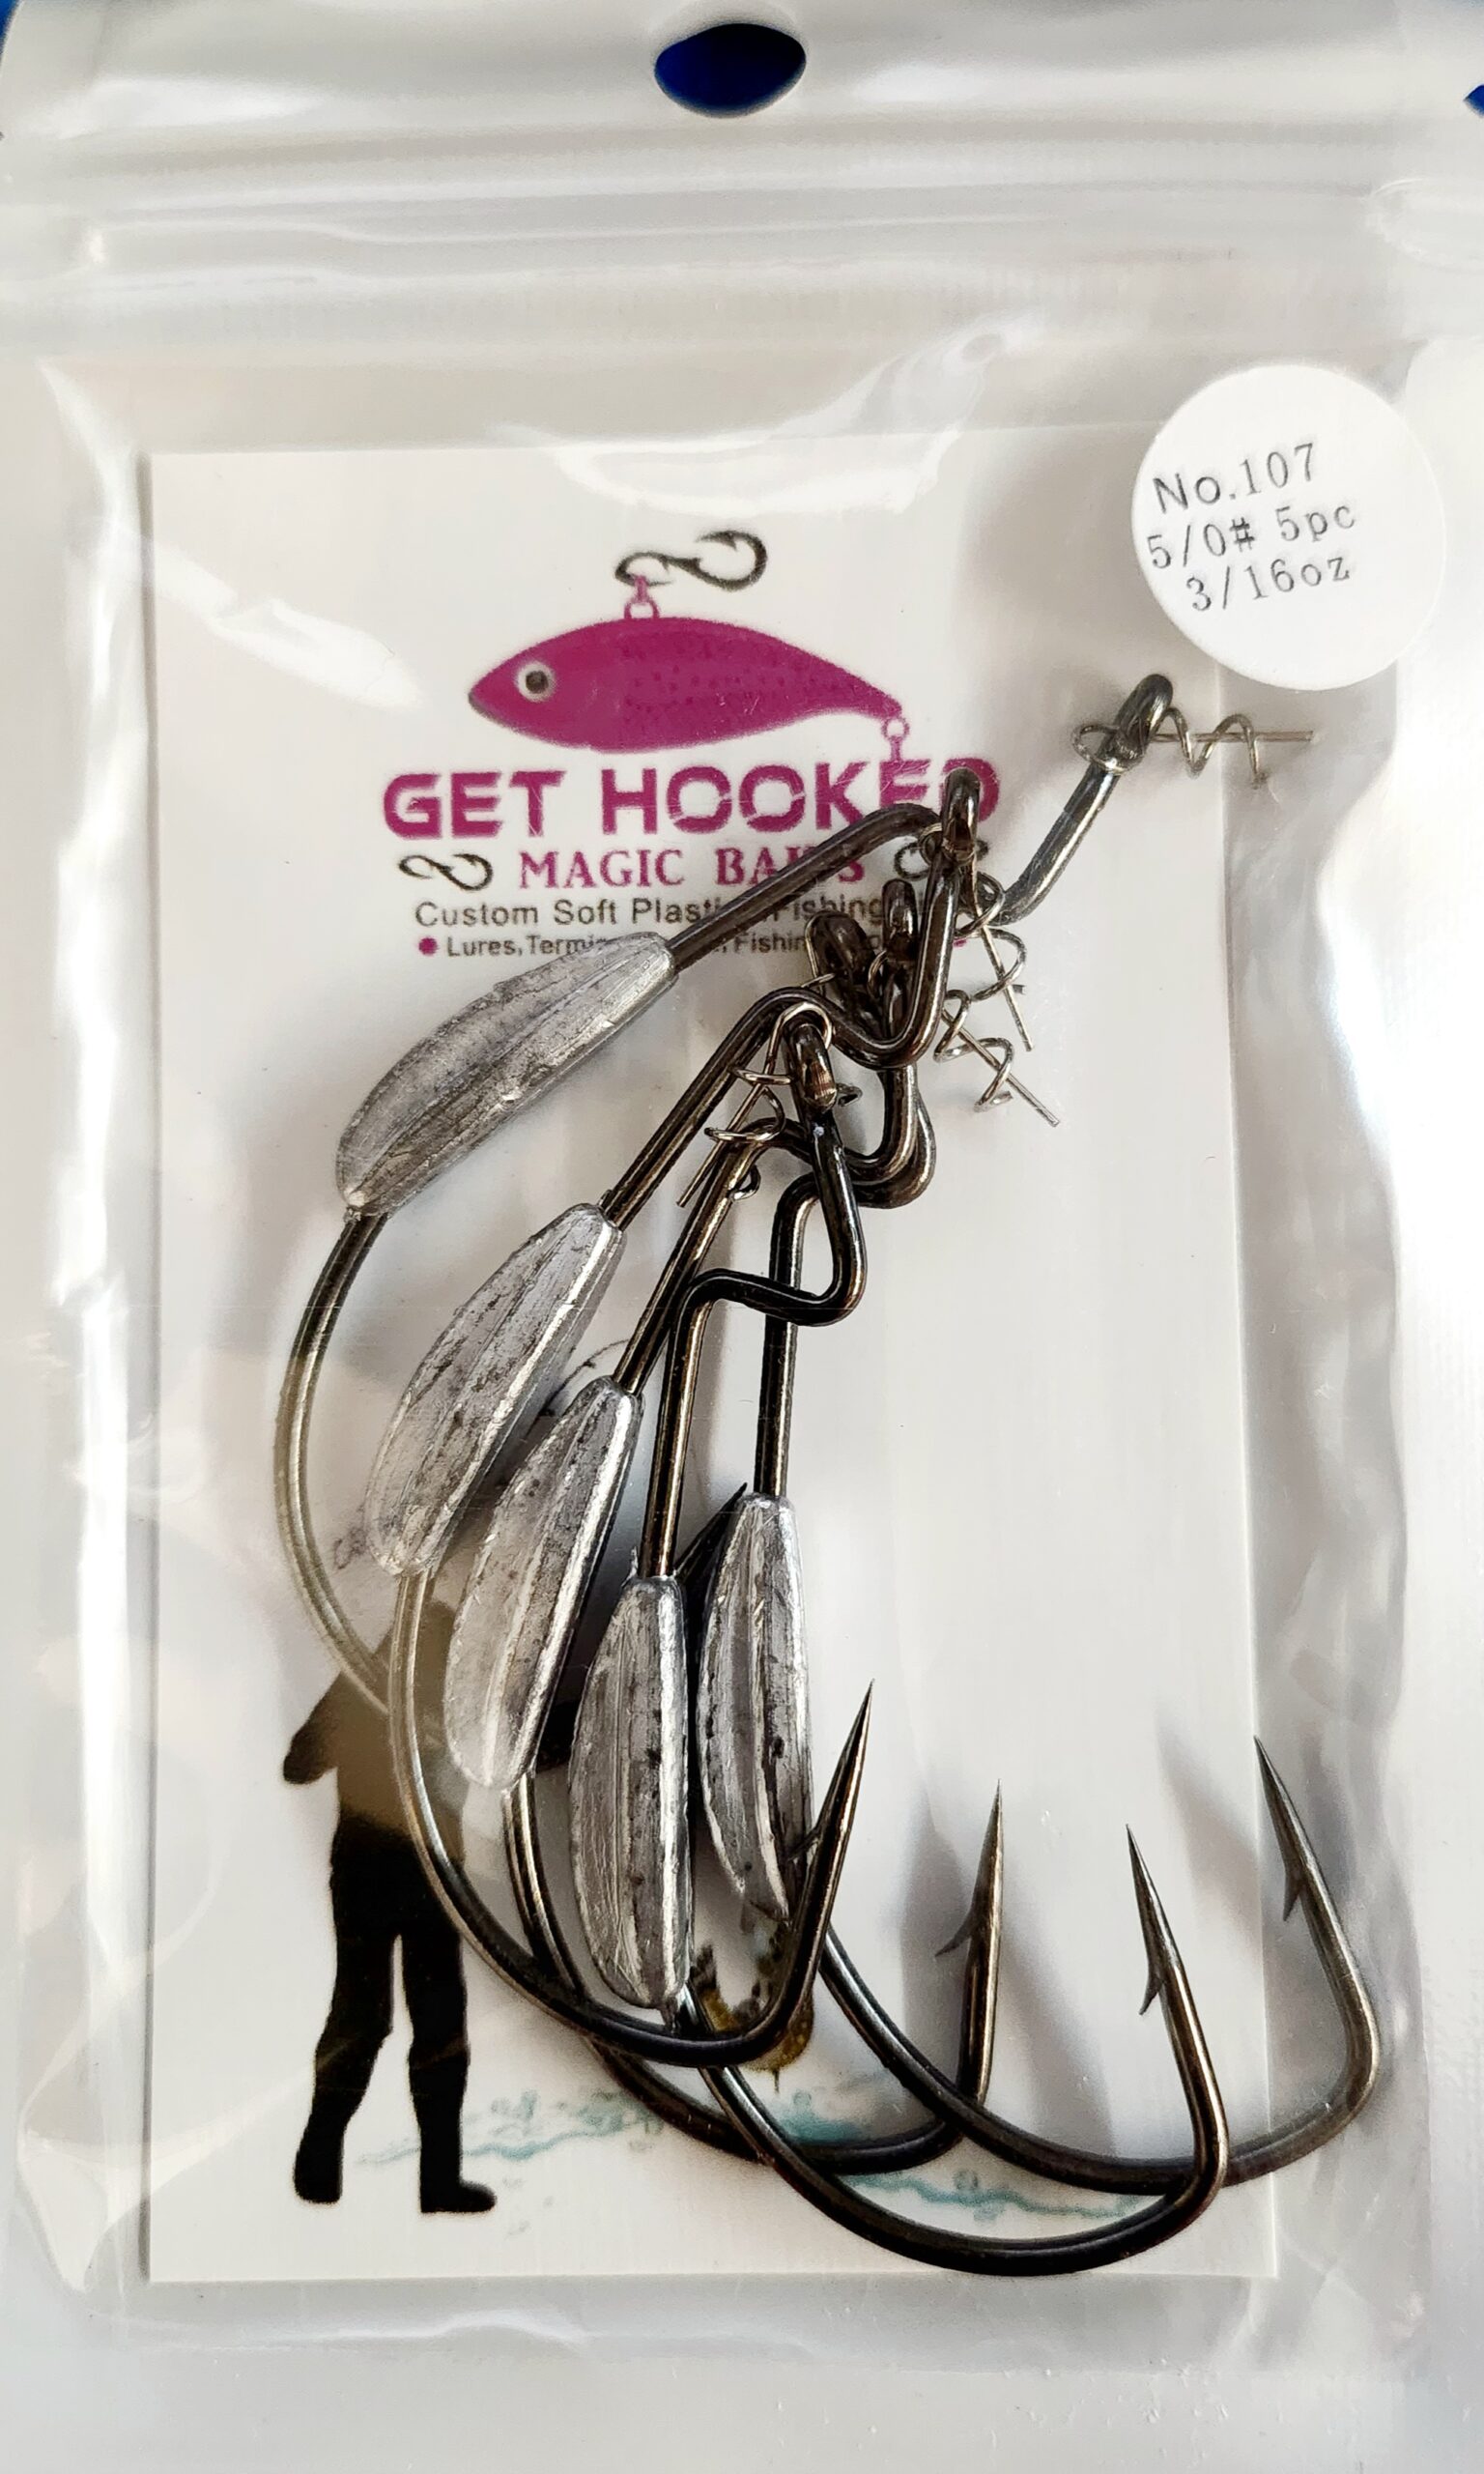 Trick buzz worm This 7 1/4 inch custom soft plastic bait will get the job  done. - Get Hooked Magic Baits